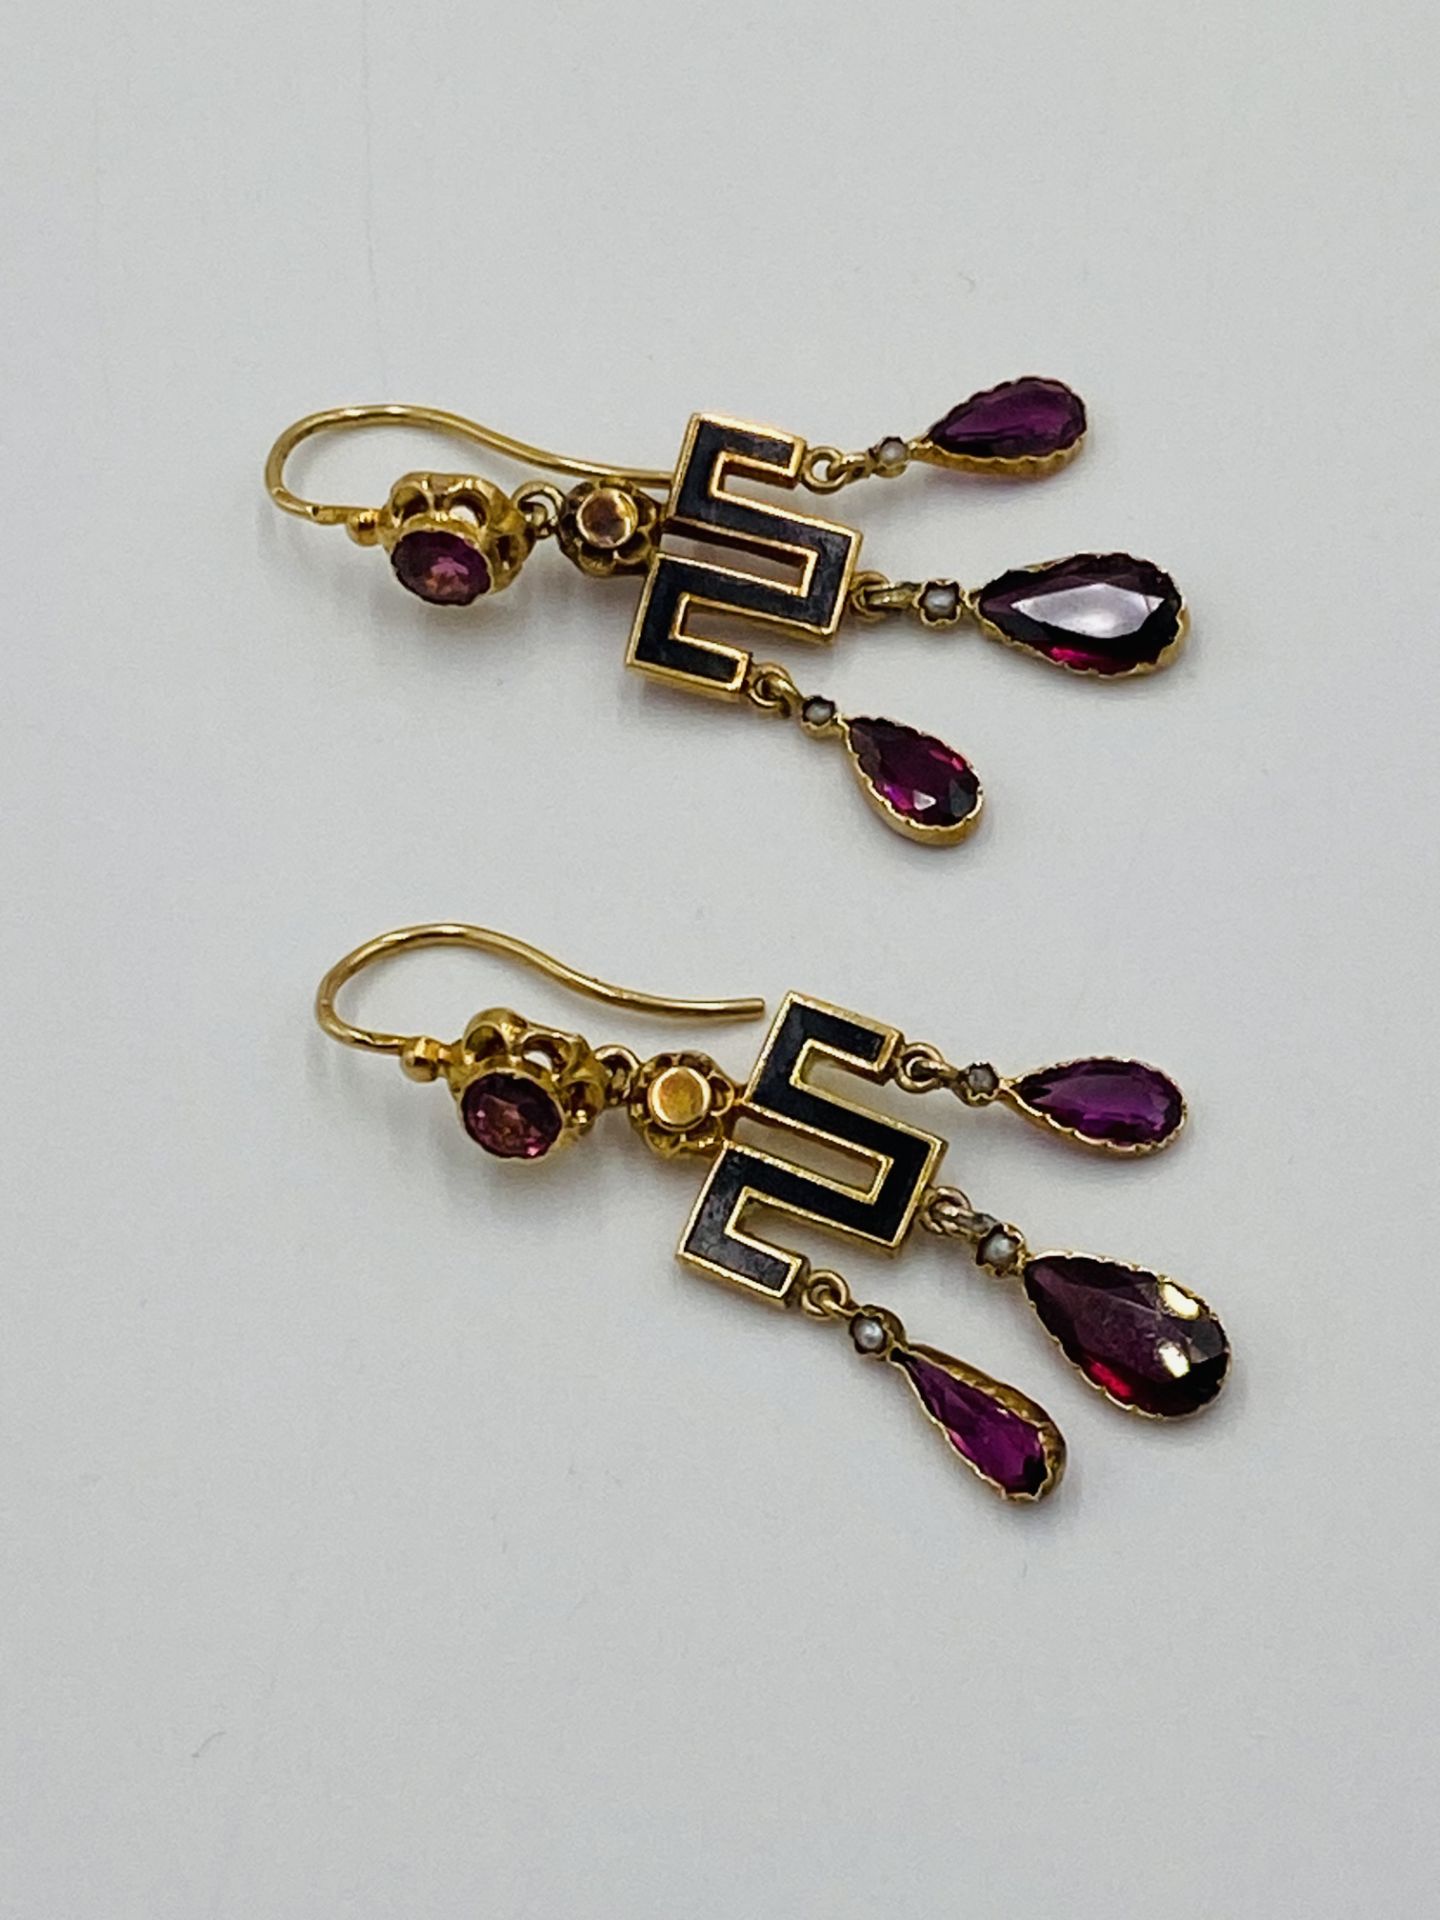 18ct gold, amethyst and seed pearl earrings - Image 4 of 4